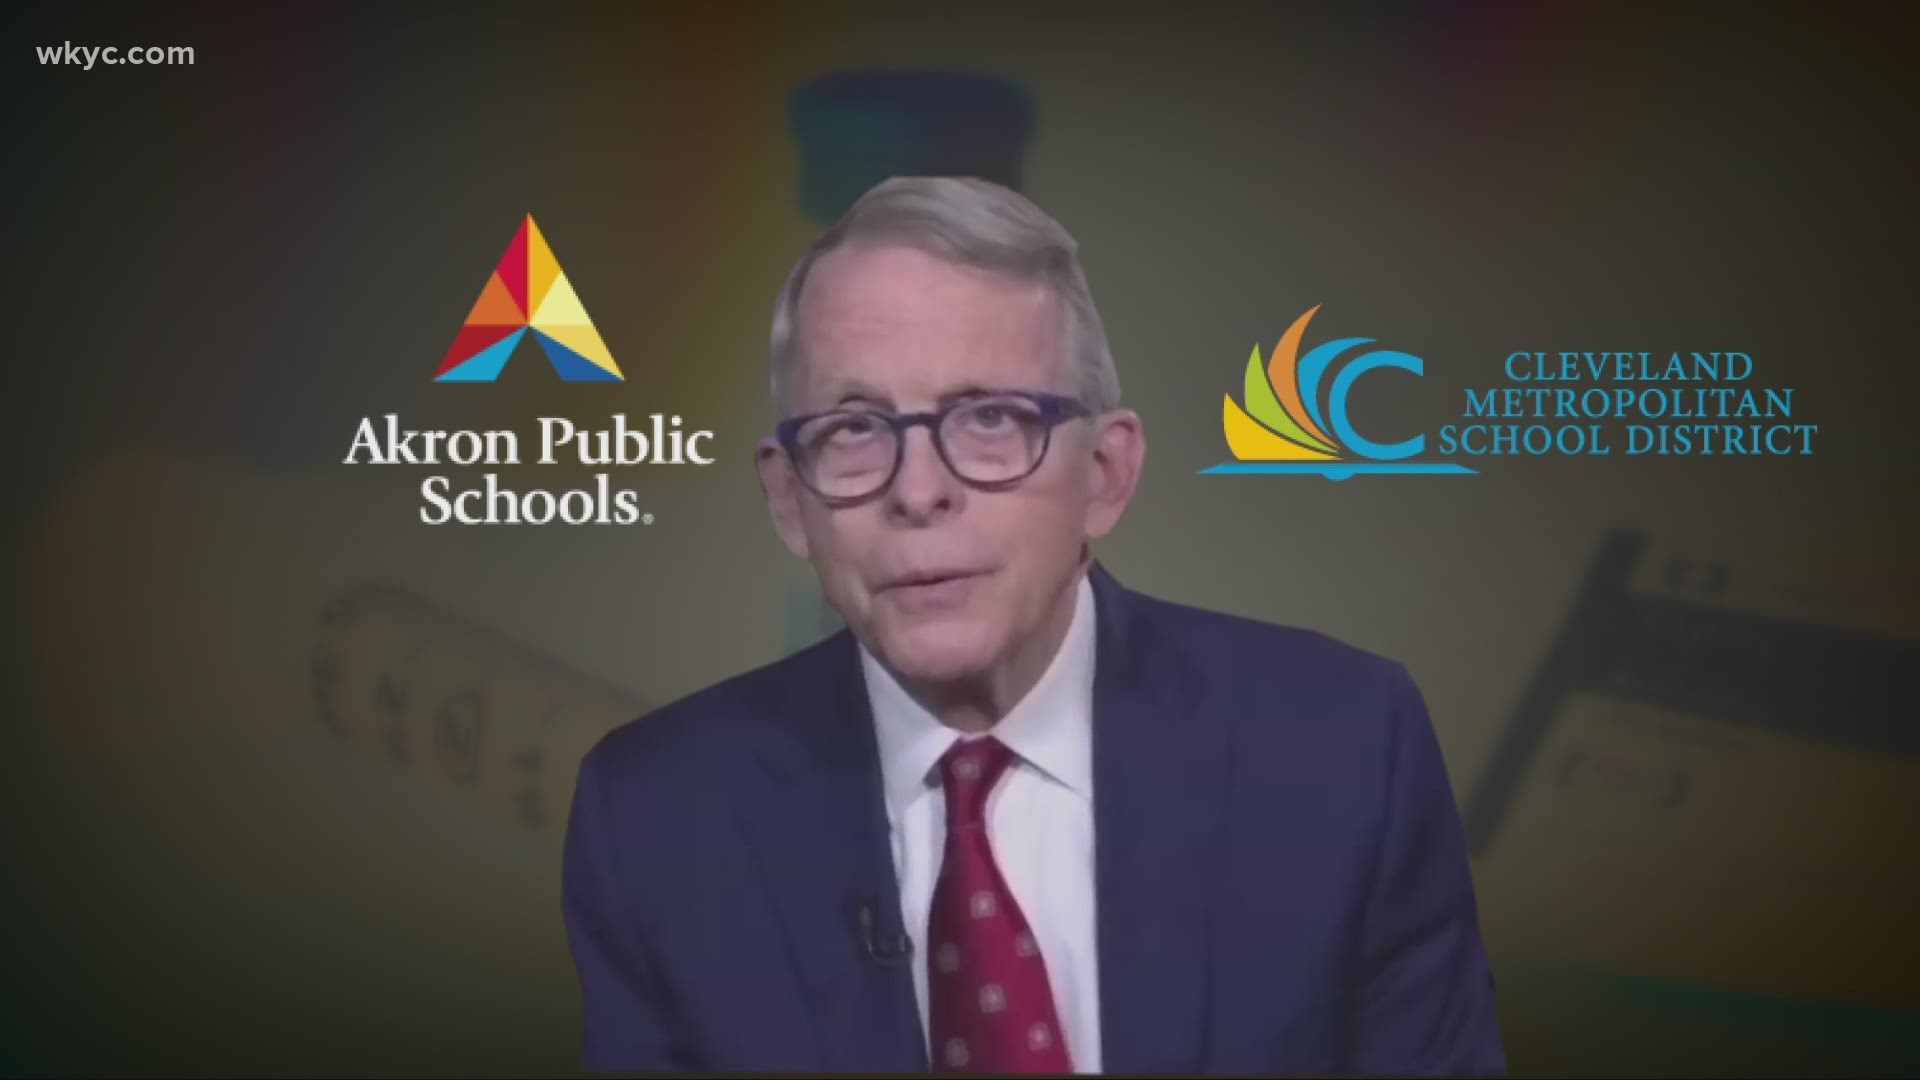 Among those districts who have said they won't go back until at least mid-March are Cleveland and Akron. Andrew Horansky has more on the developing situation.